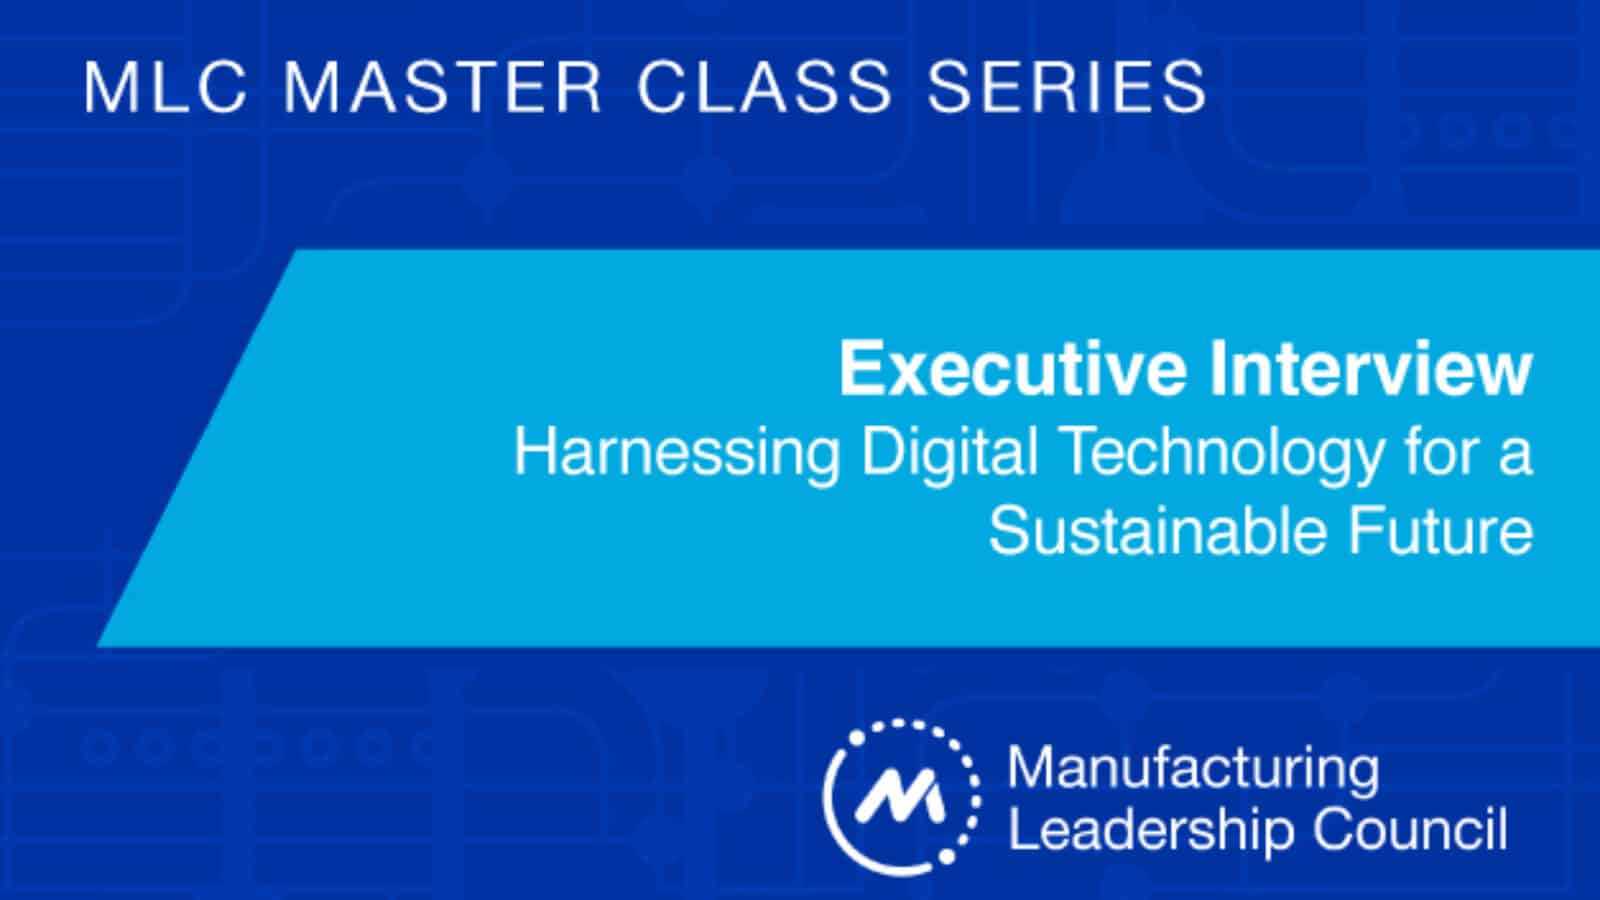 Master Class: Harnessing Digital Technology for a Sustainable Future